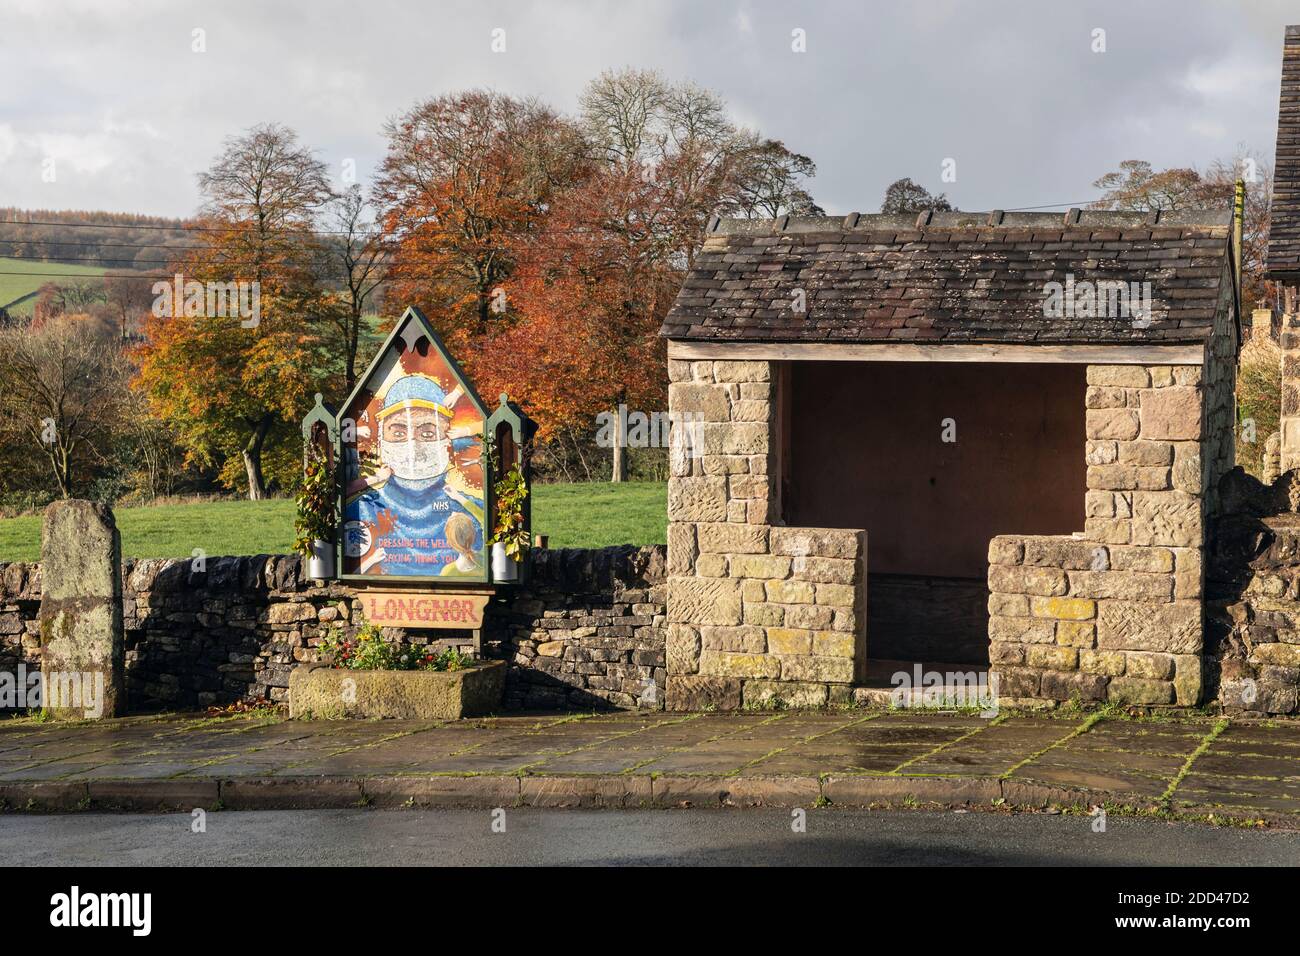 During lockdown traditional Peak District well dressings of flowers were cancelled so in the village of Longnor they painted this tribute to the NHS. Stock Photo